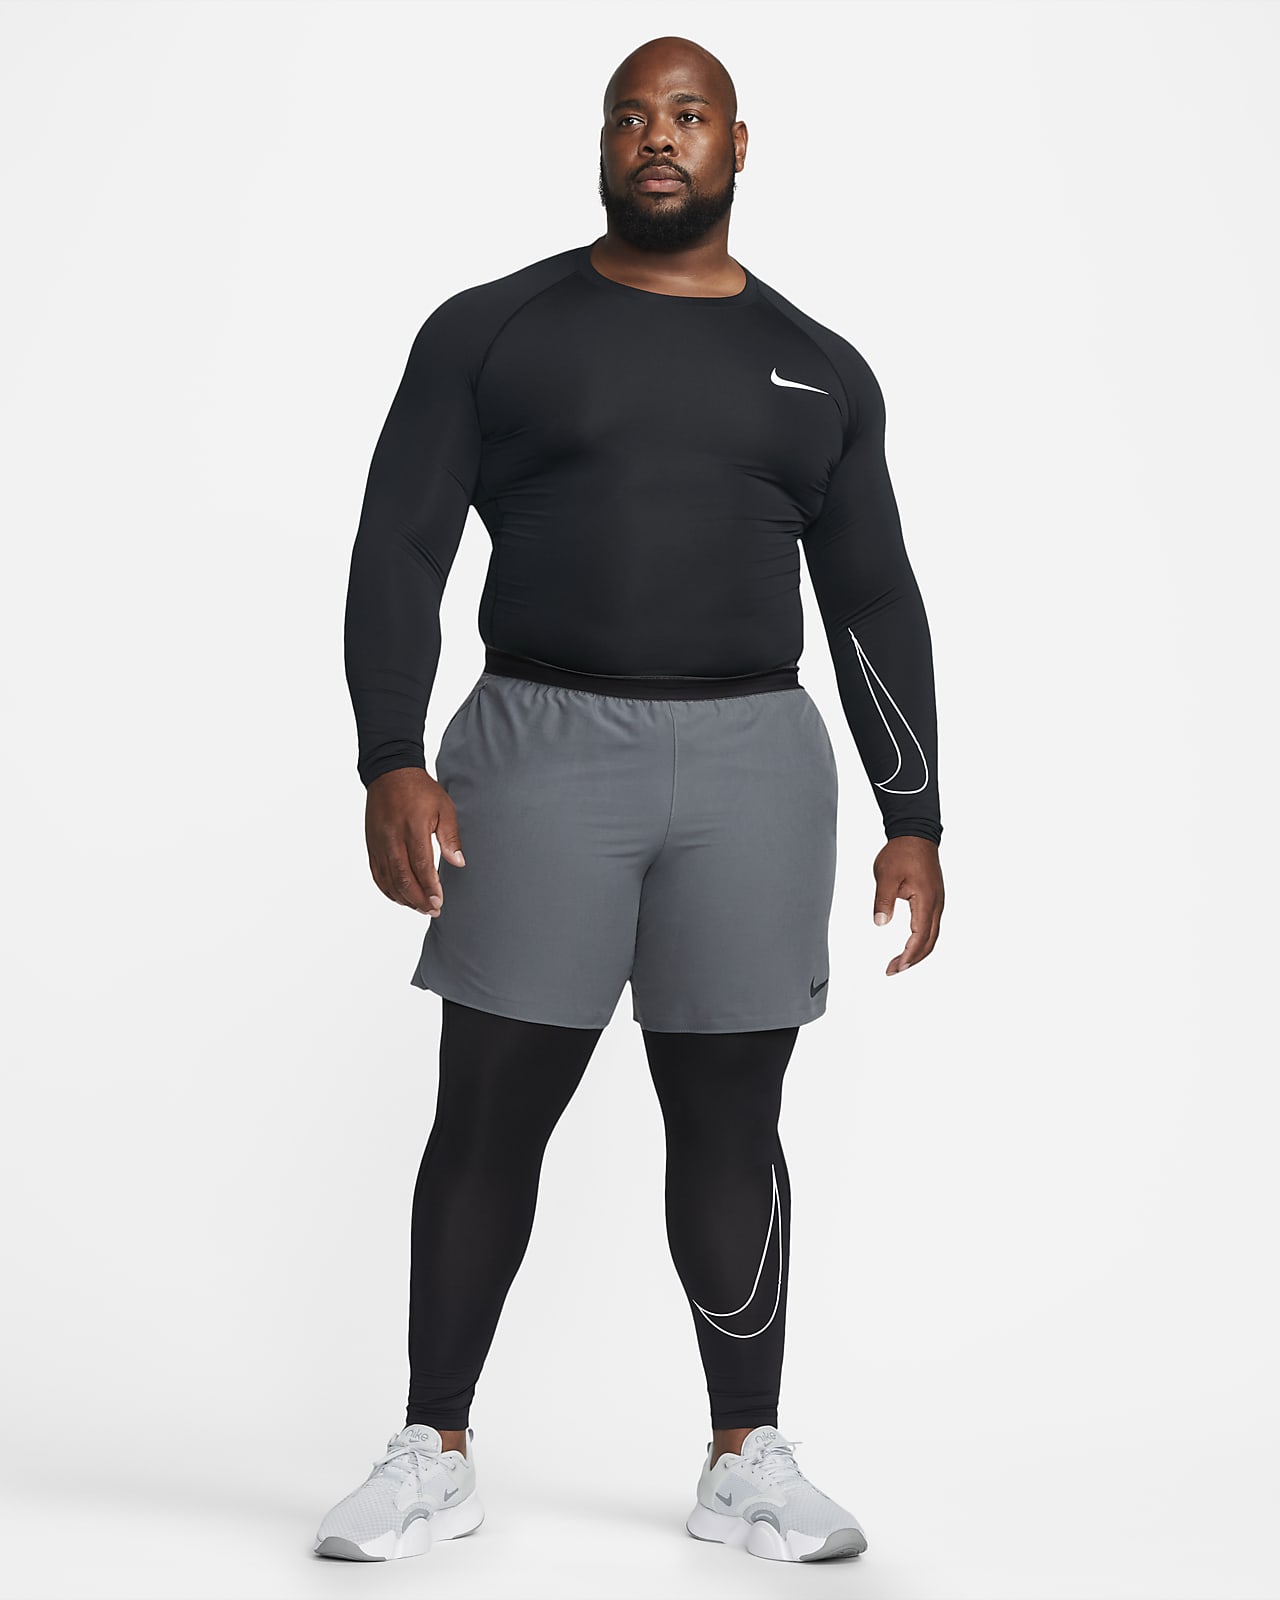 Mens Nike Pro Collection.